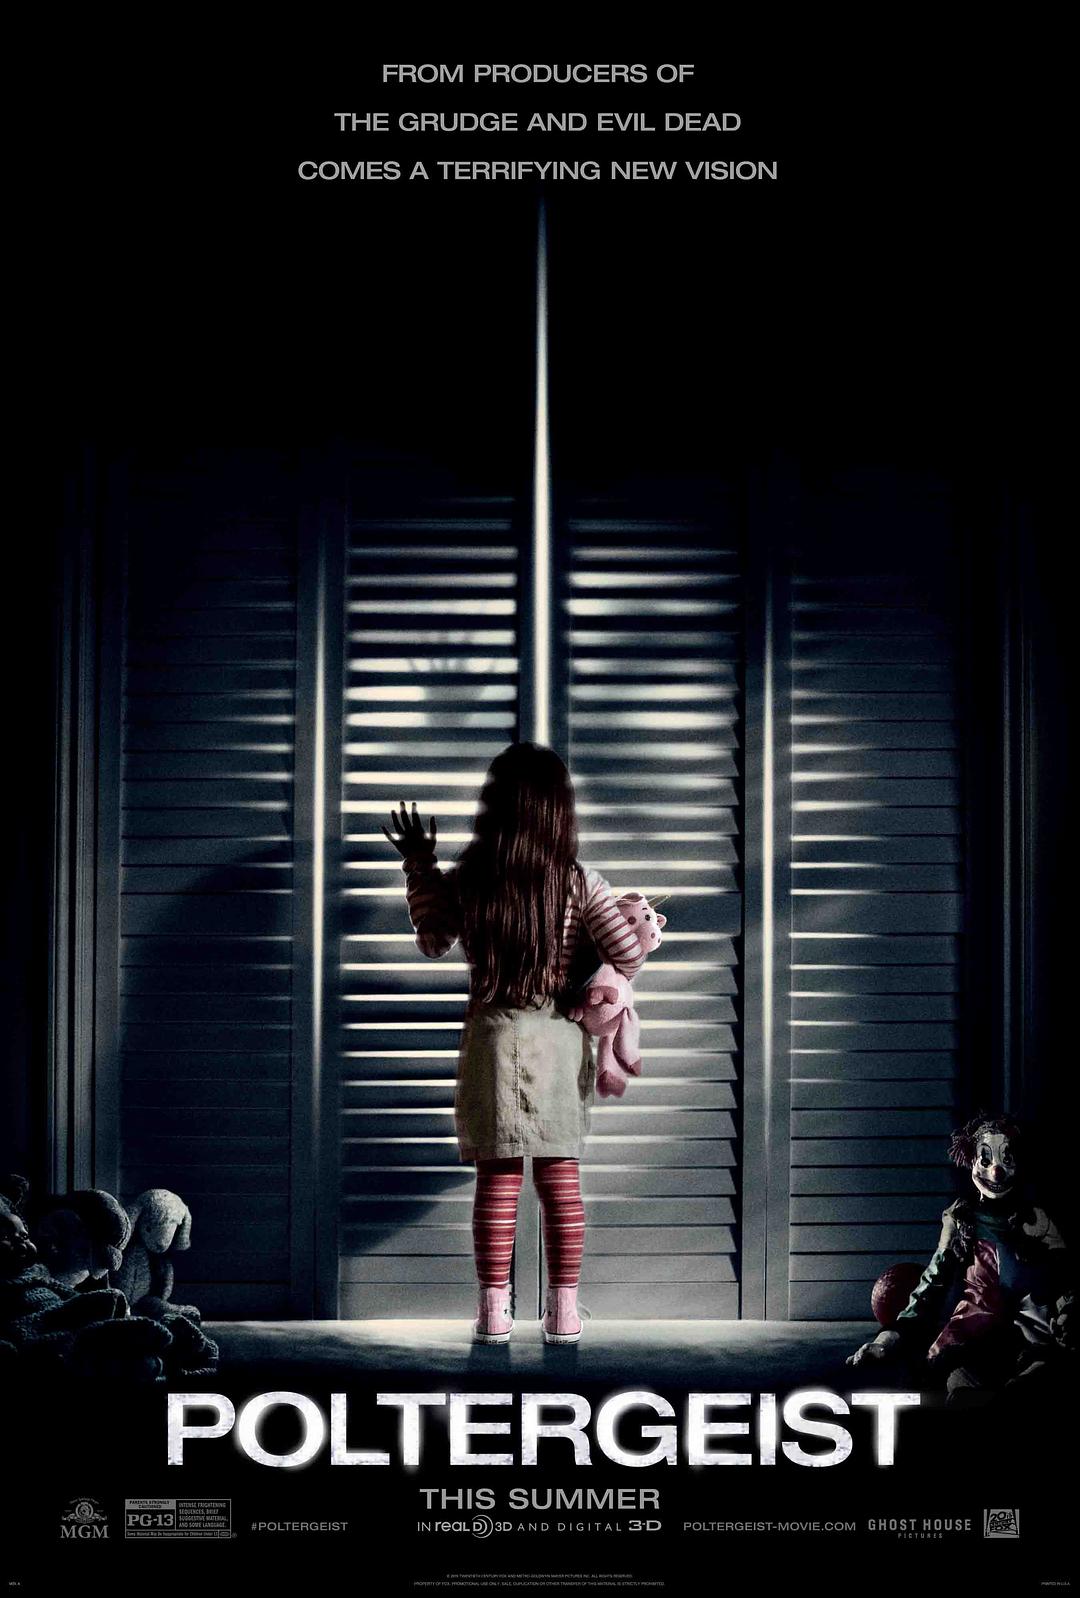 / Poltergeist.2015.EXTENDED.1080p.BluRay.x264-ALLiANCE 7.71GB-1.png